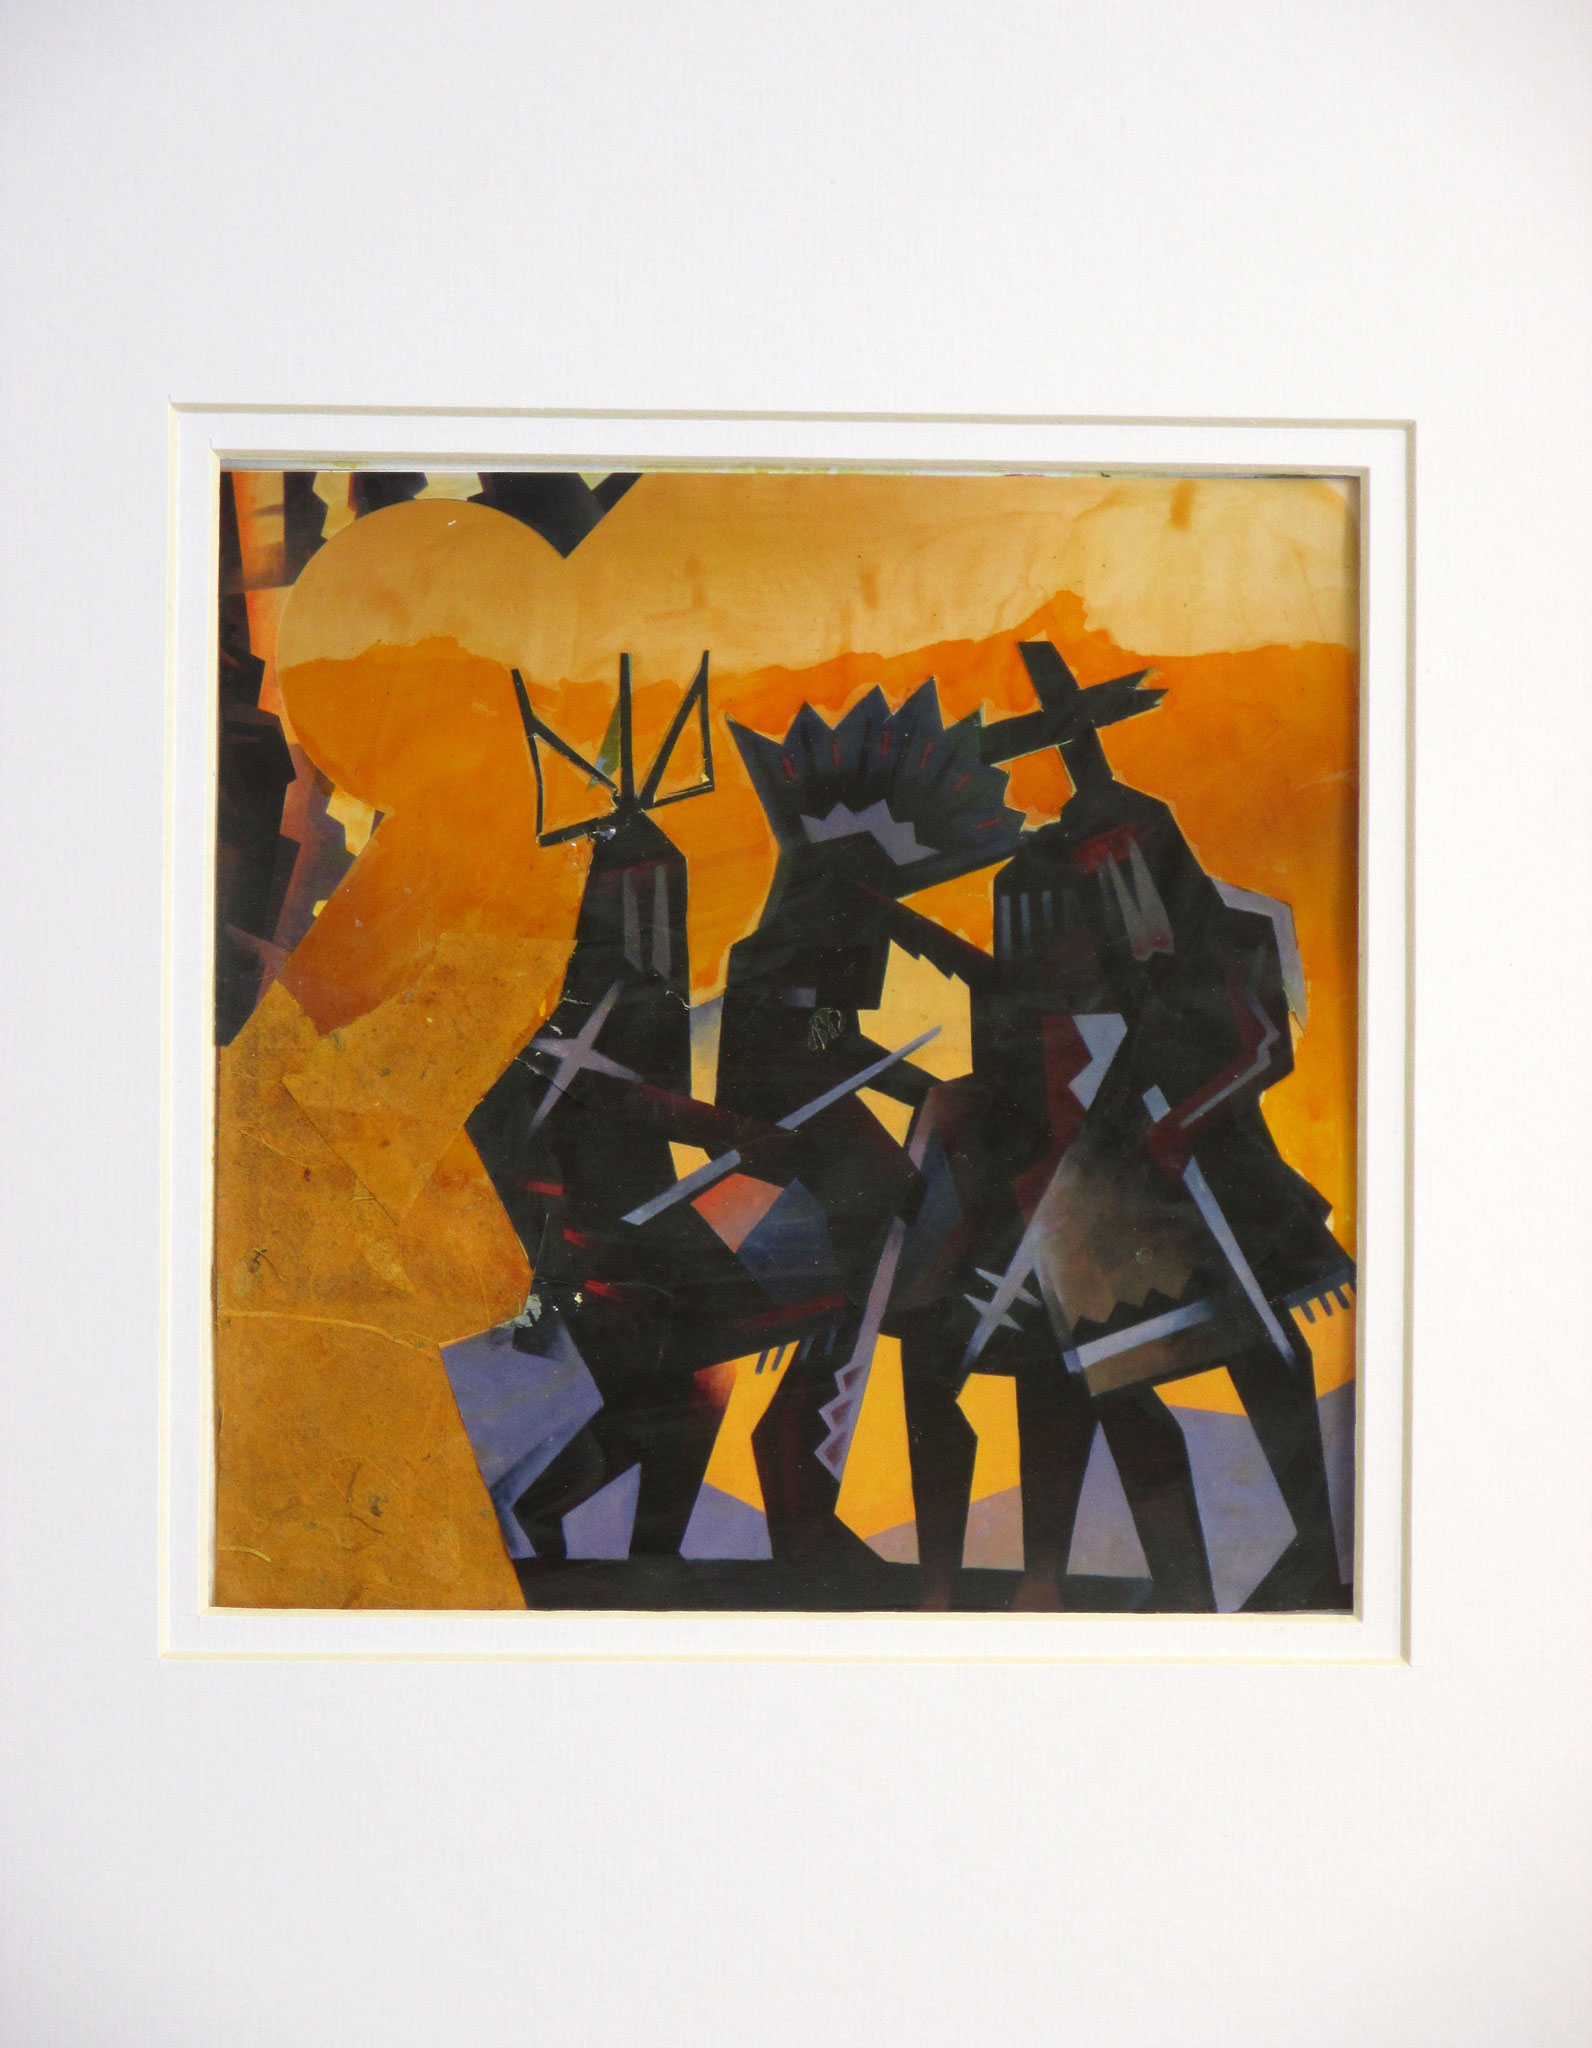 Native Dancers, collage on paper, 11 x 14, matted, 2016, SOLD